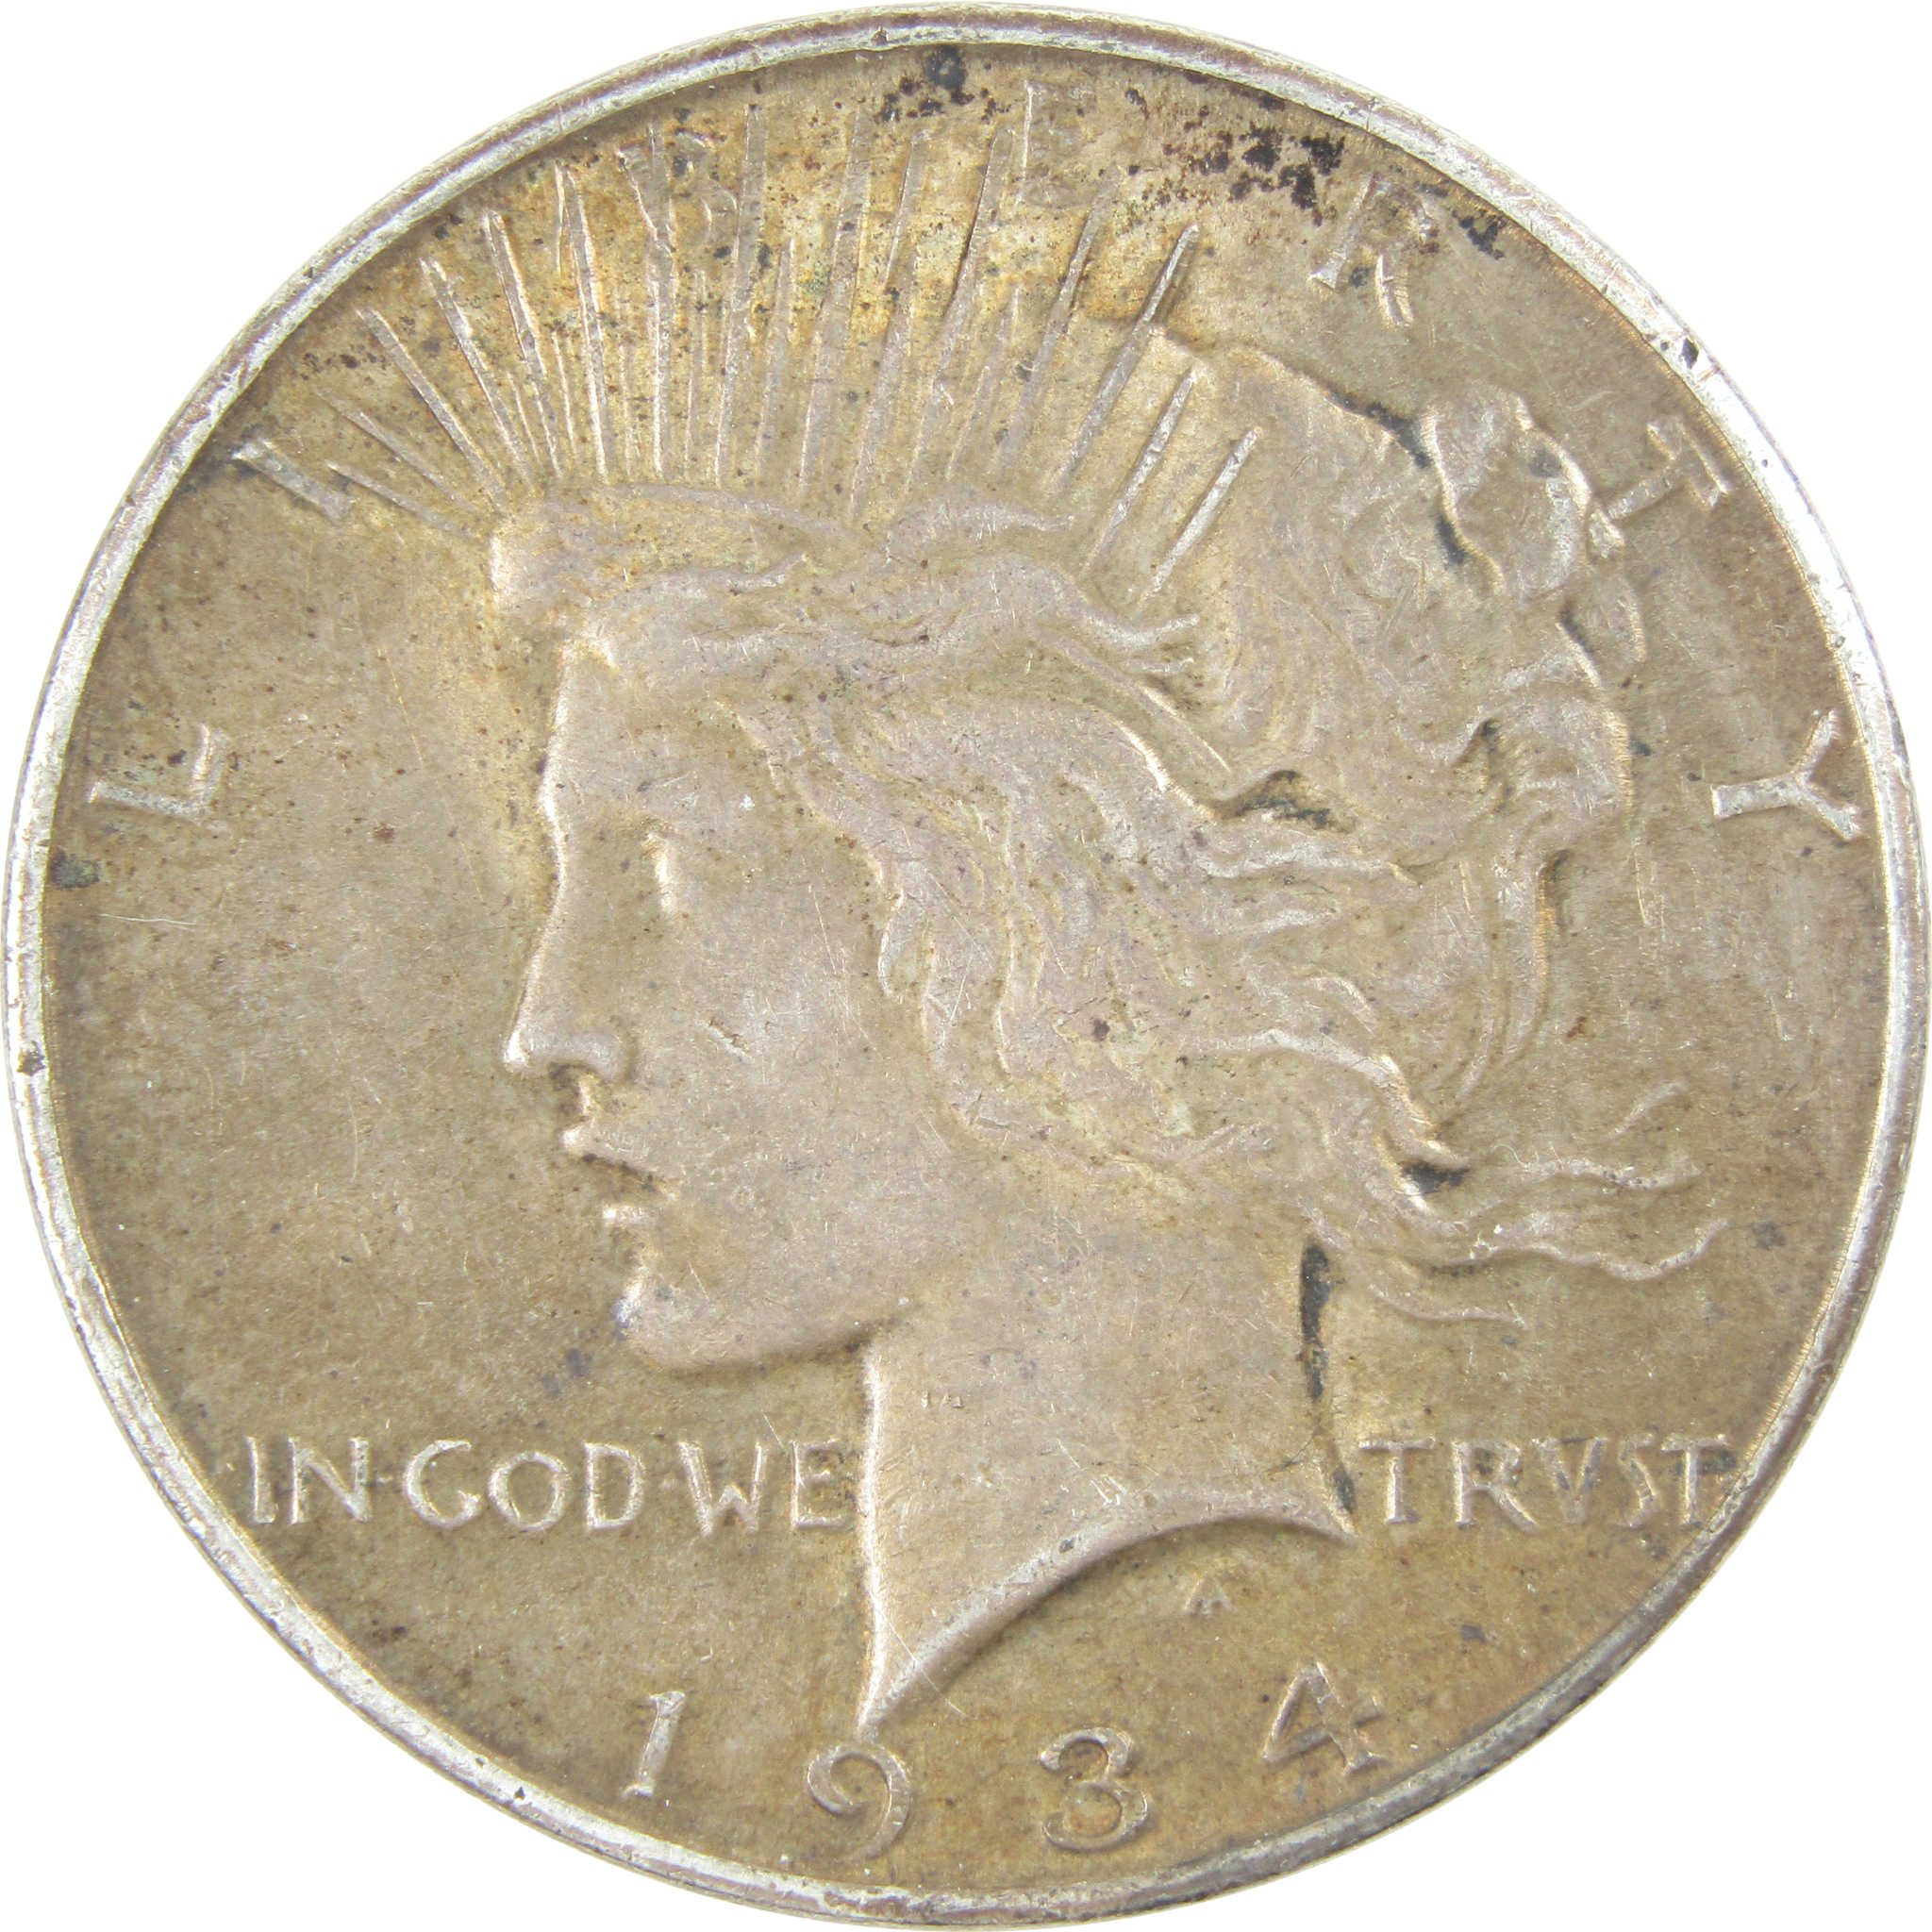 1934 D Peace Dollar XF EF Extremely Fine Silver $1 Coin SKU:I13691